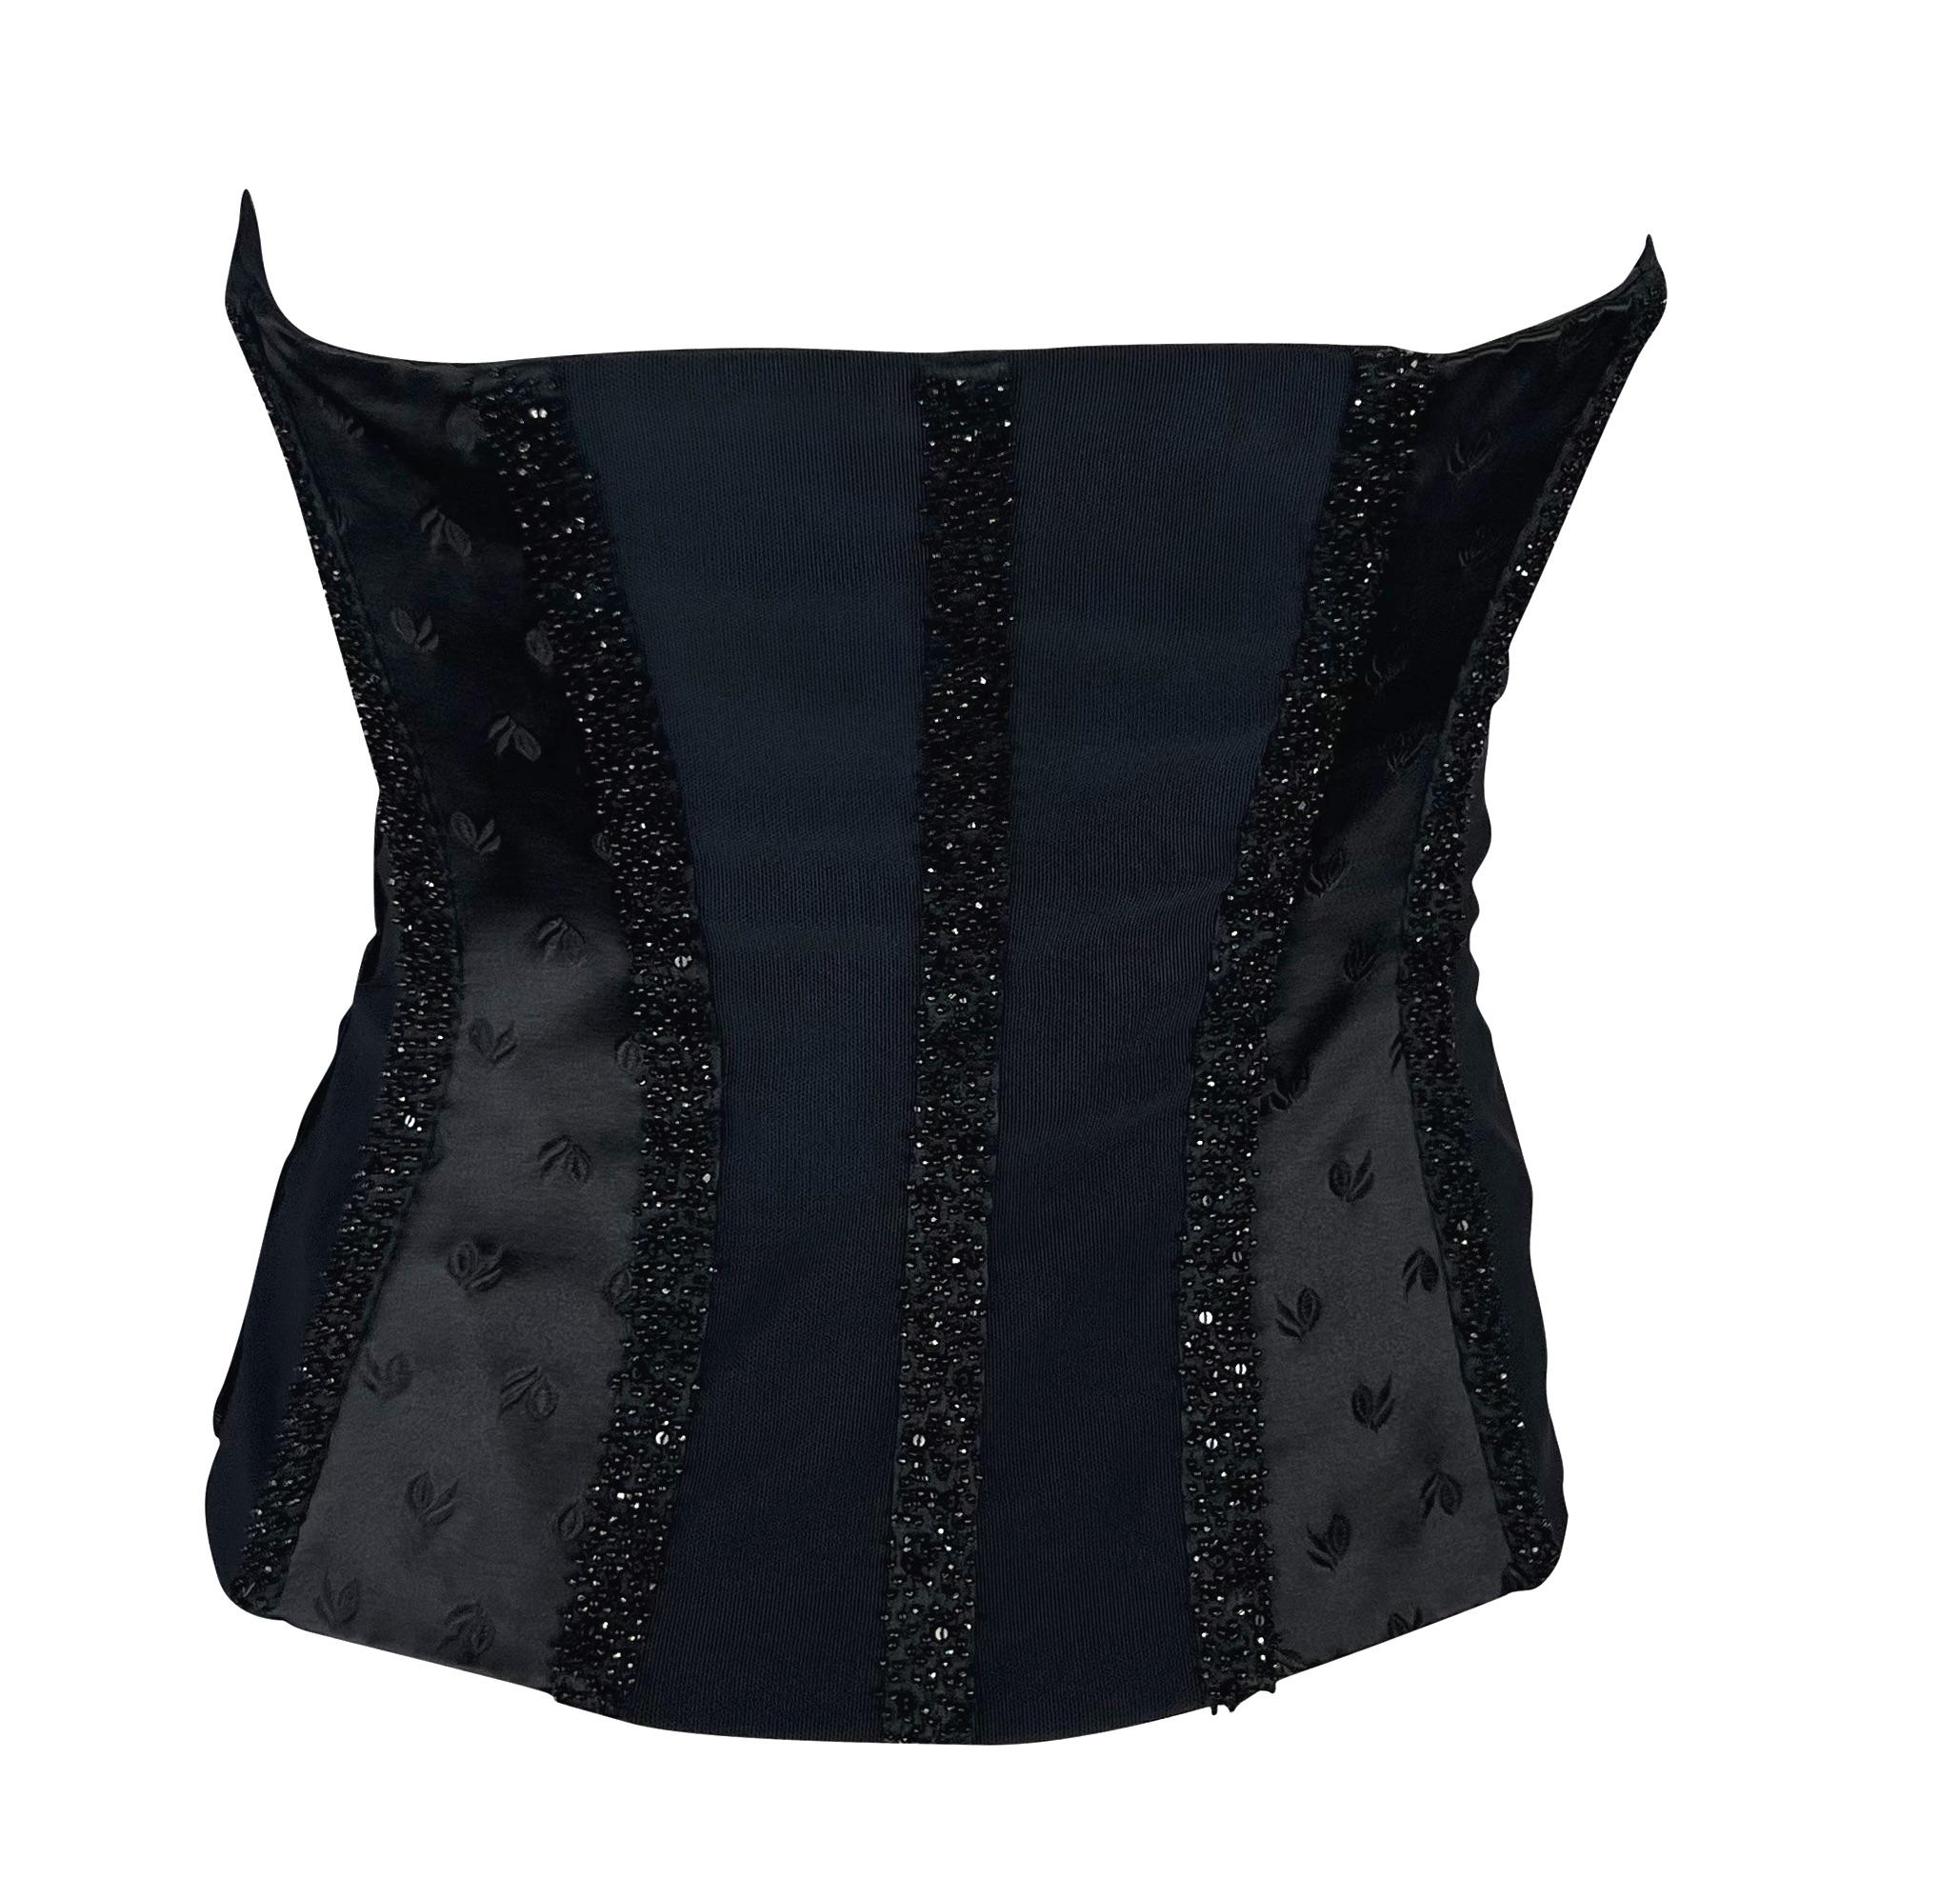 Women's S/S 2001 Gianni Versace by Donatella Black Beaded Panel Bustier Corset Top For Sale